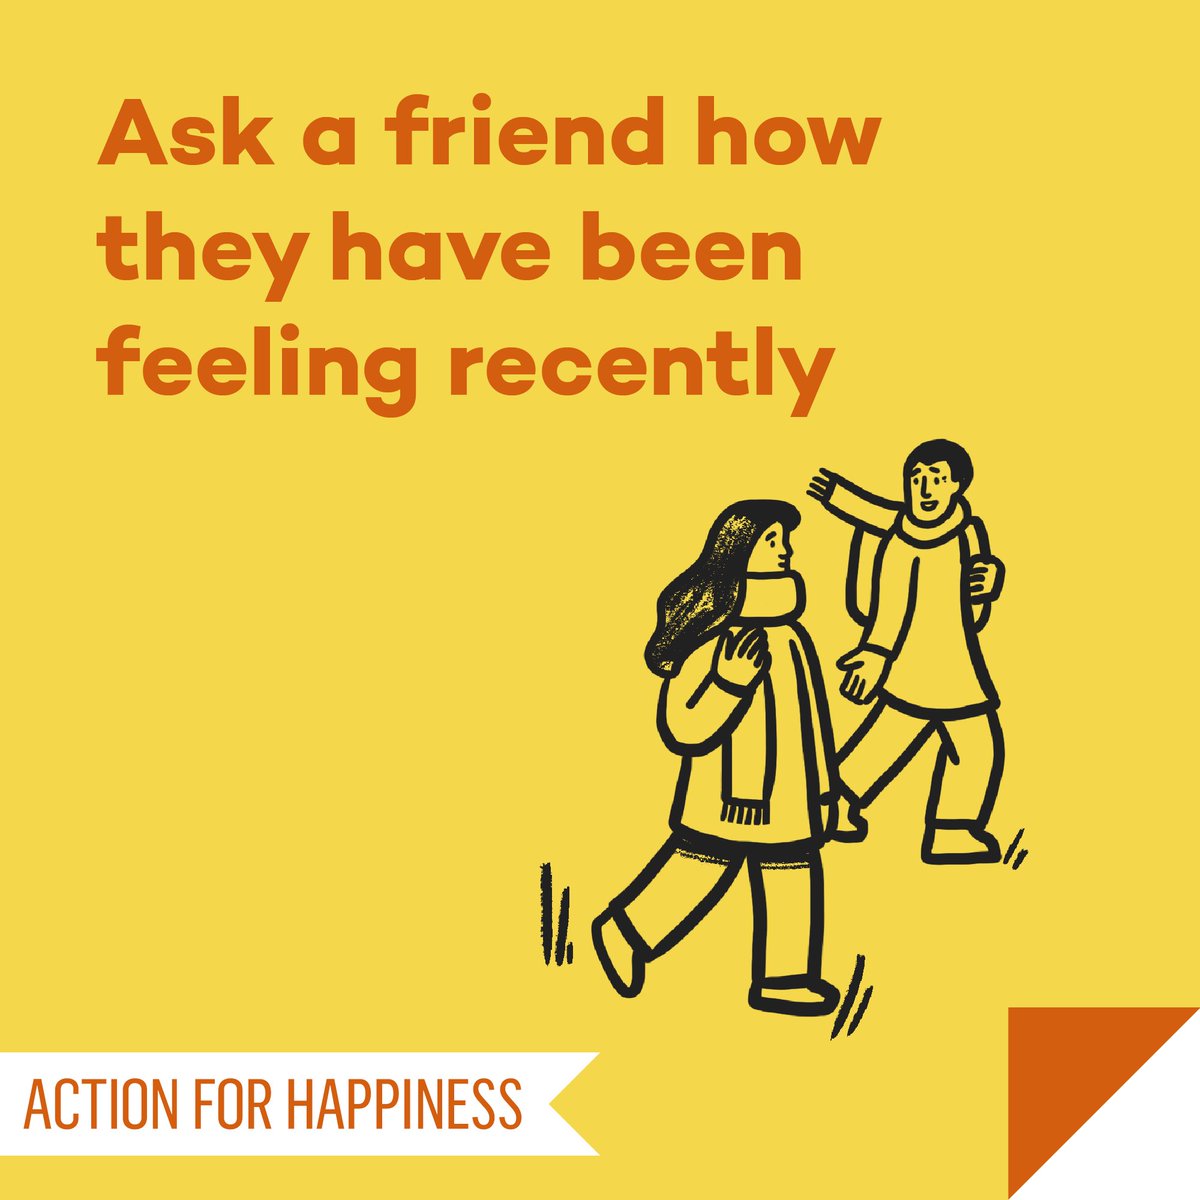 Friendly February - Day 2: Ask a friend how they have been feeling recently actionforhappiness.org/friendly-febru… #FriendlyFebruary